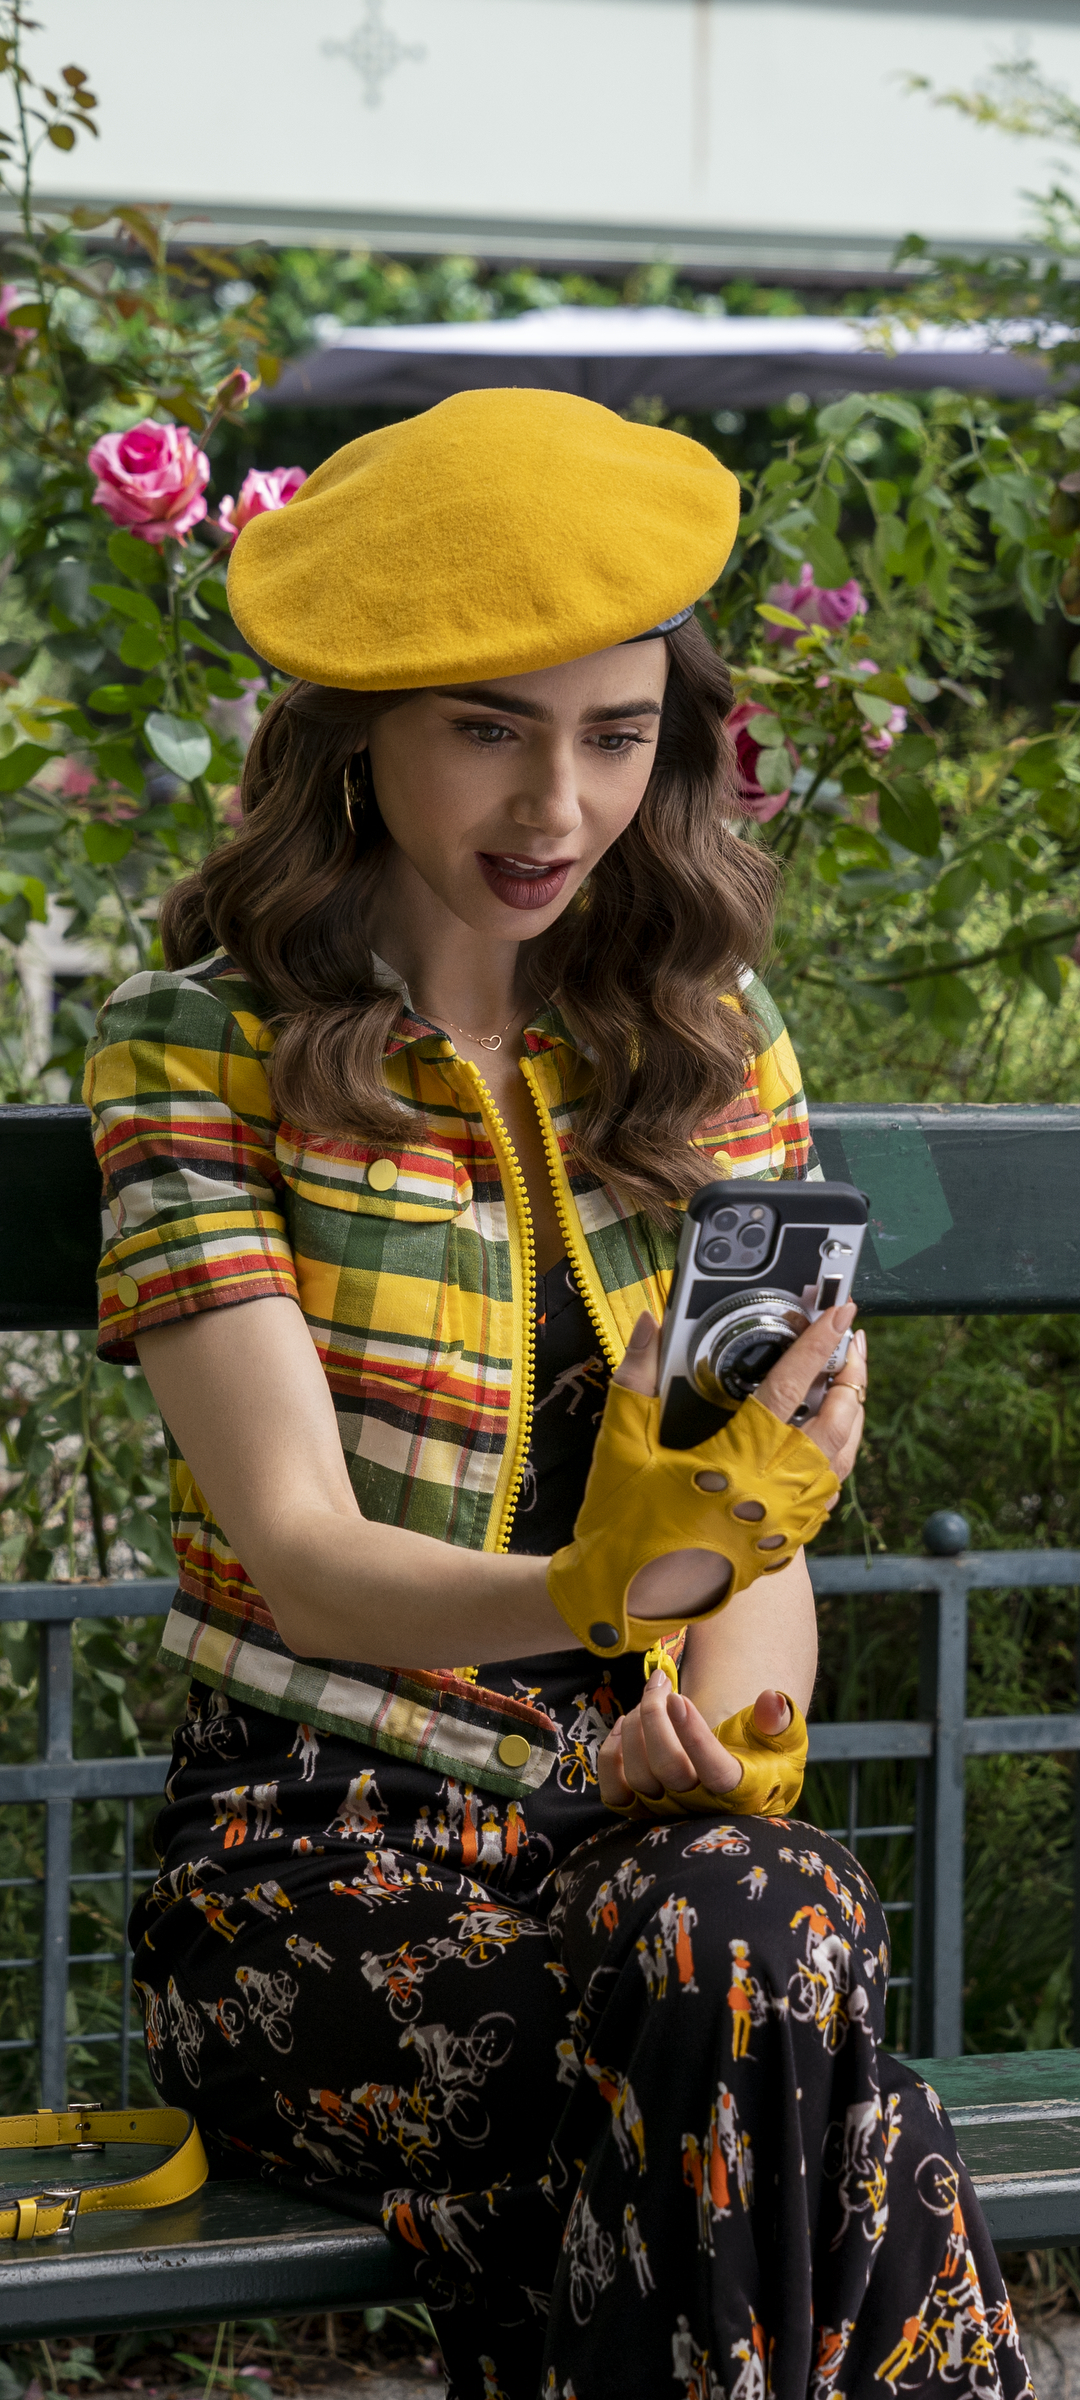 emily in paris, tv show, lily collins